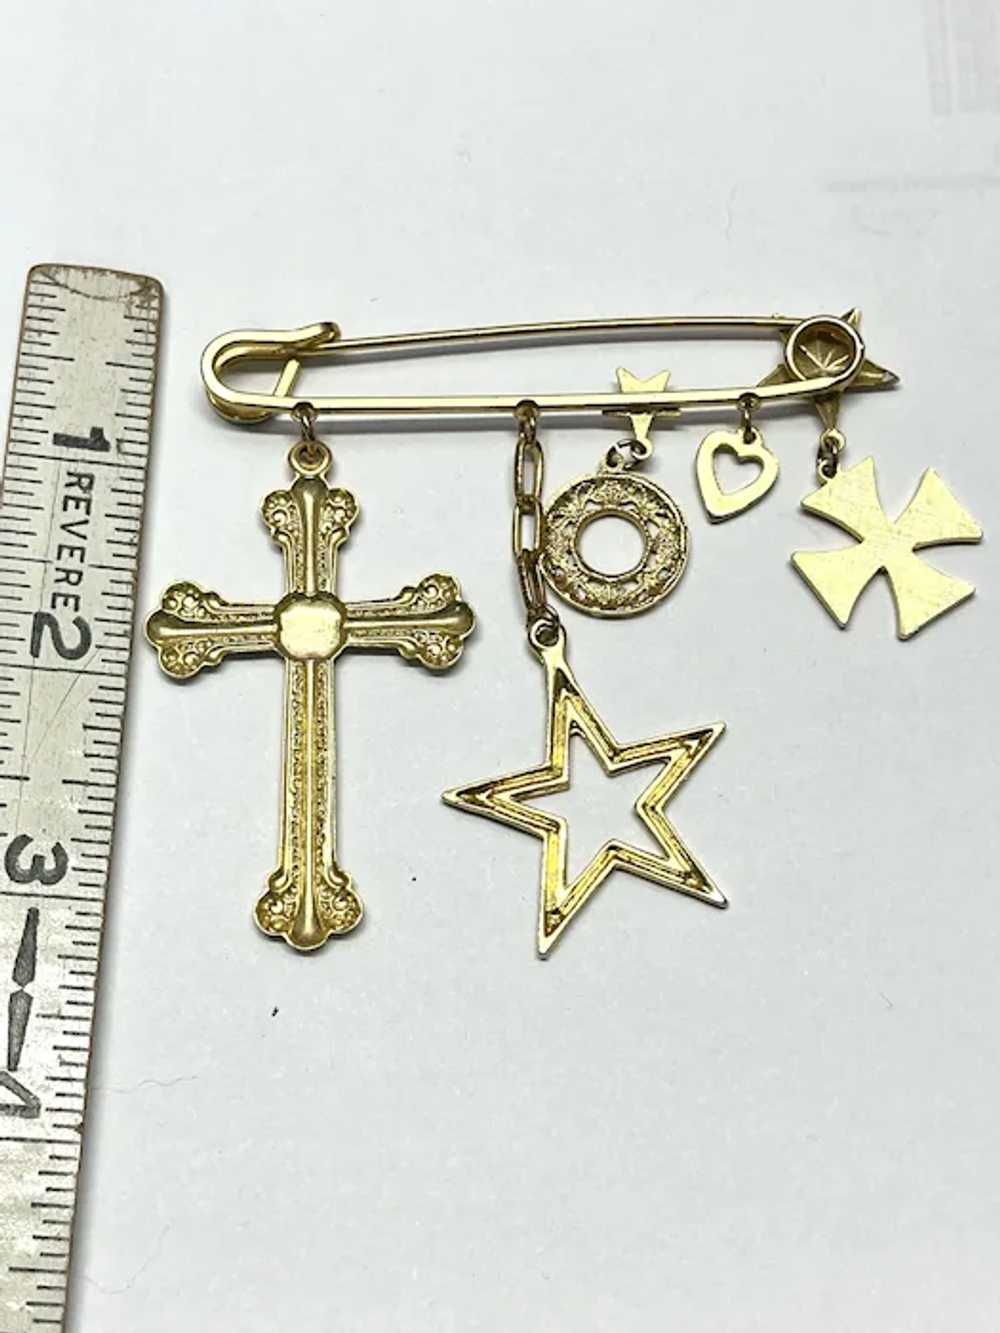 Vintage Gold Safety Pin Charm Brooch Pin - image 4